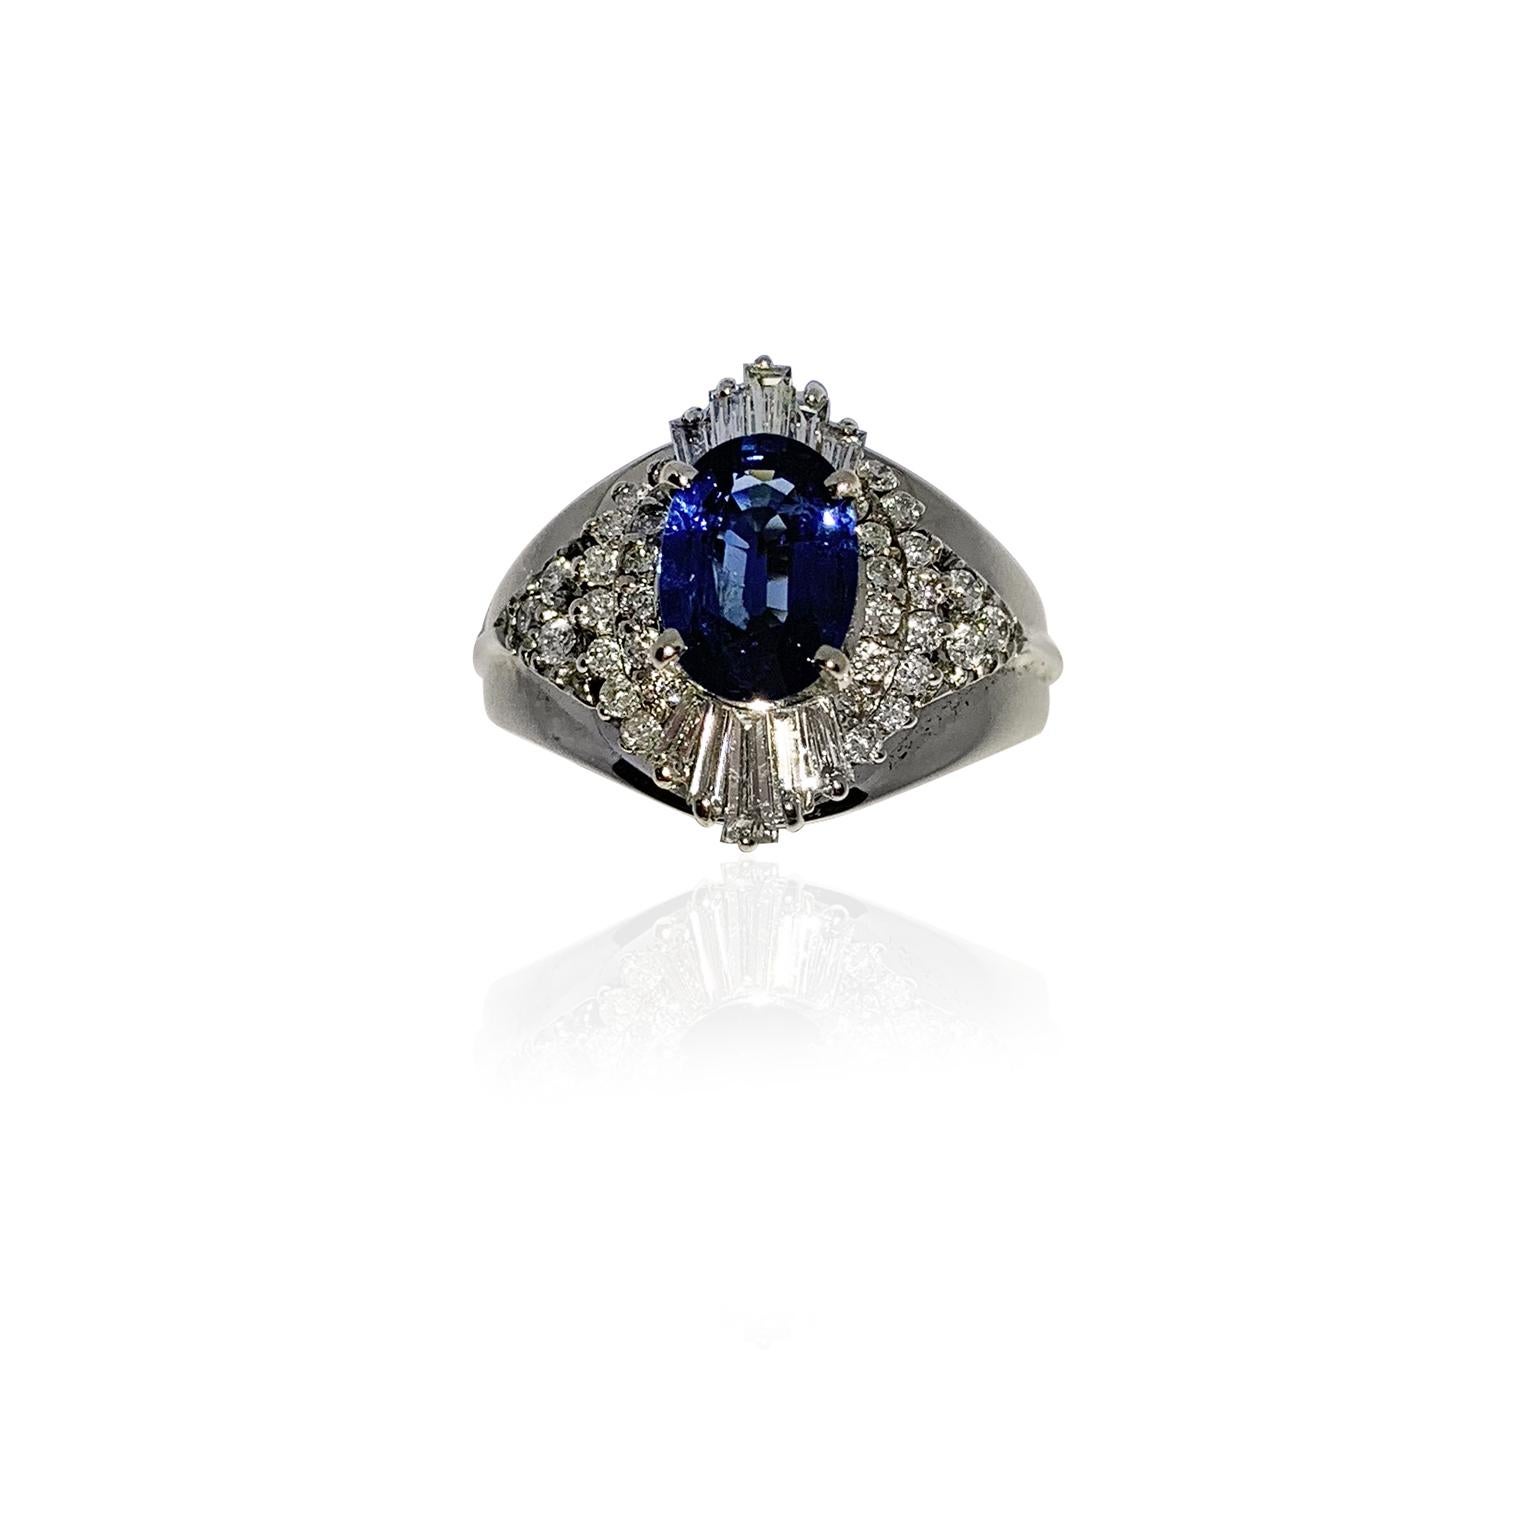 White 18 kt gold ring diamonds and natural blu sapphire classic design
Stamp 750
total gold weight 7,60
total diamond weight 0,80
total sapphire weight 1,77
usa size 6.5